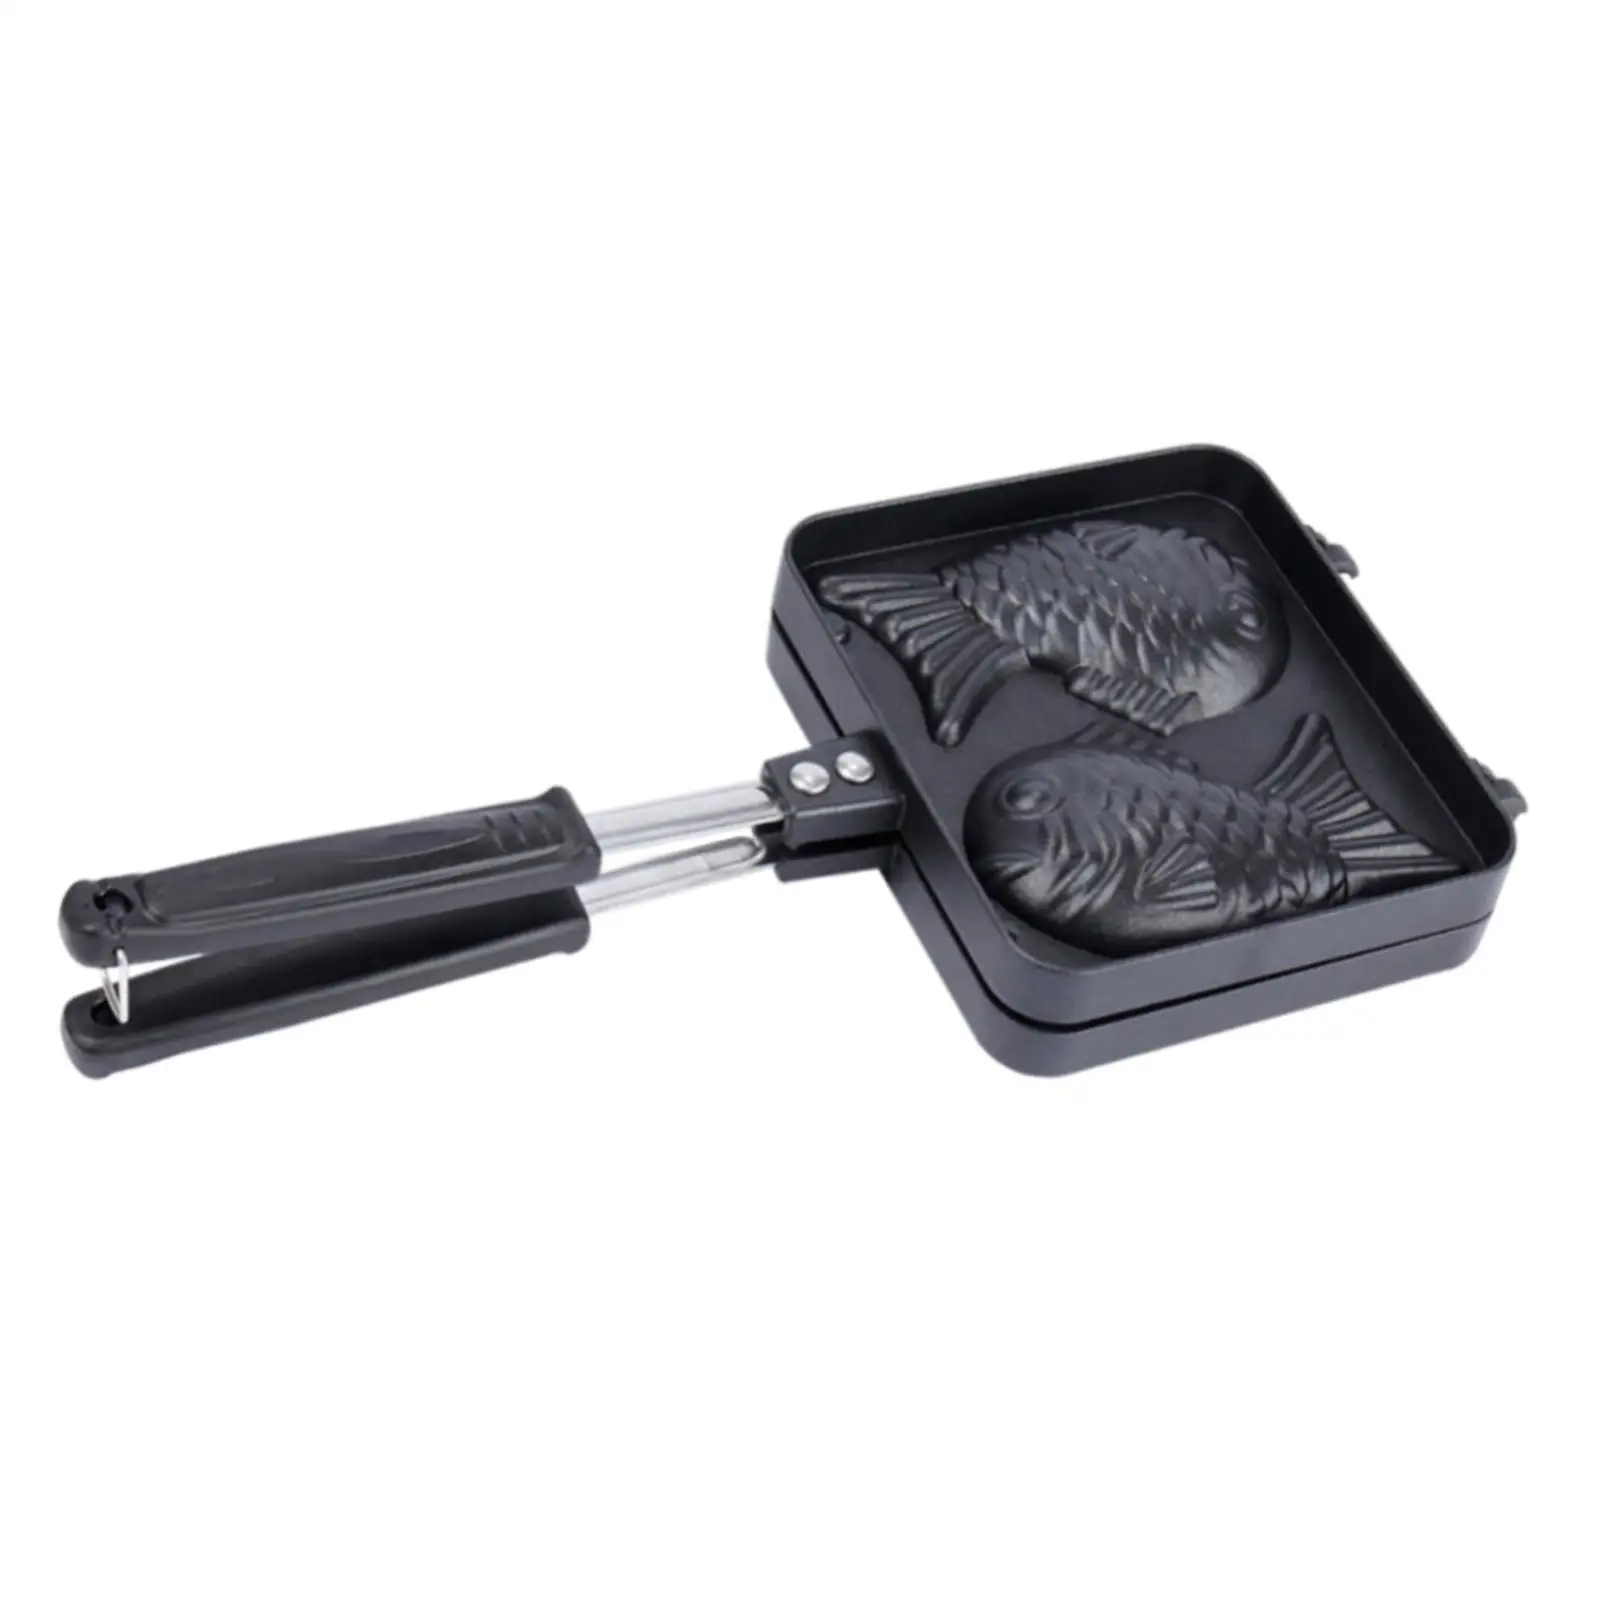 Japanese Style Waffle Maker Practical Kitchengadget Aluminum Durable Nonstick Snapper Grilling Dish